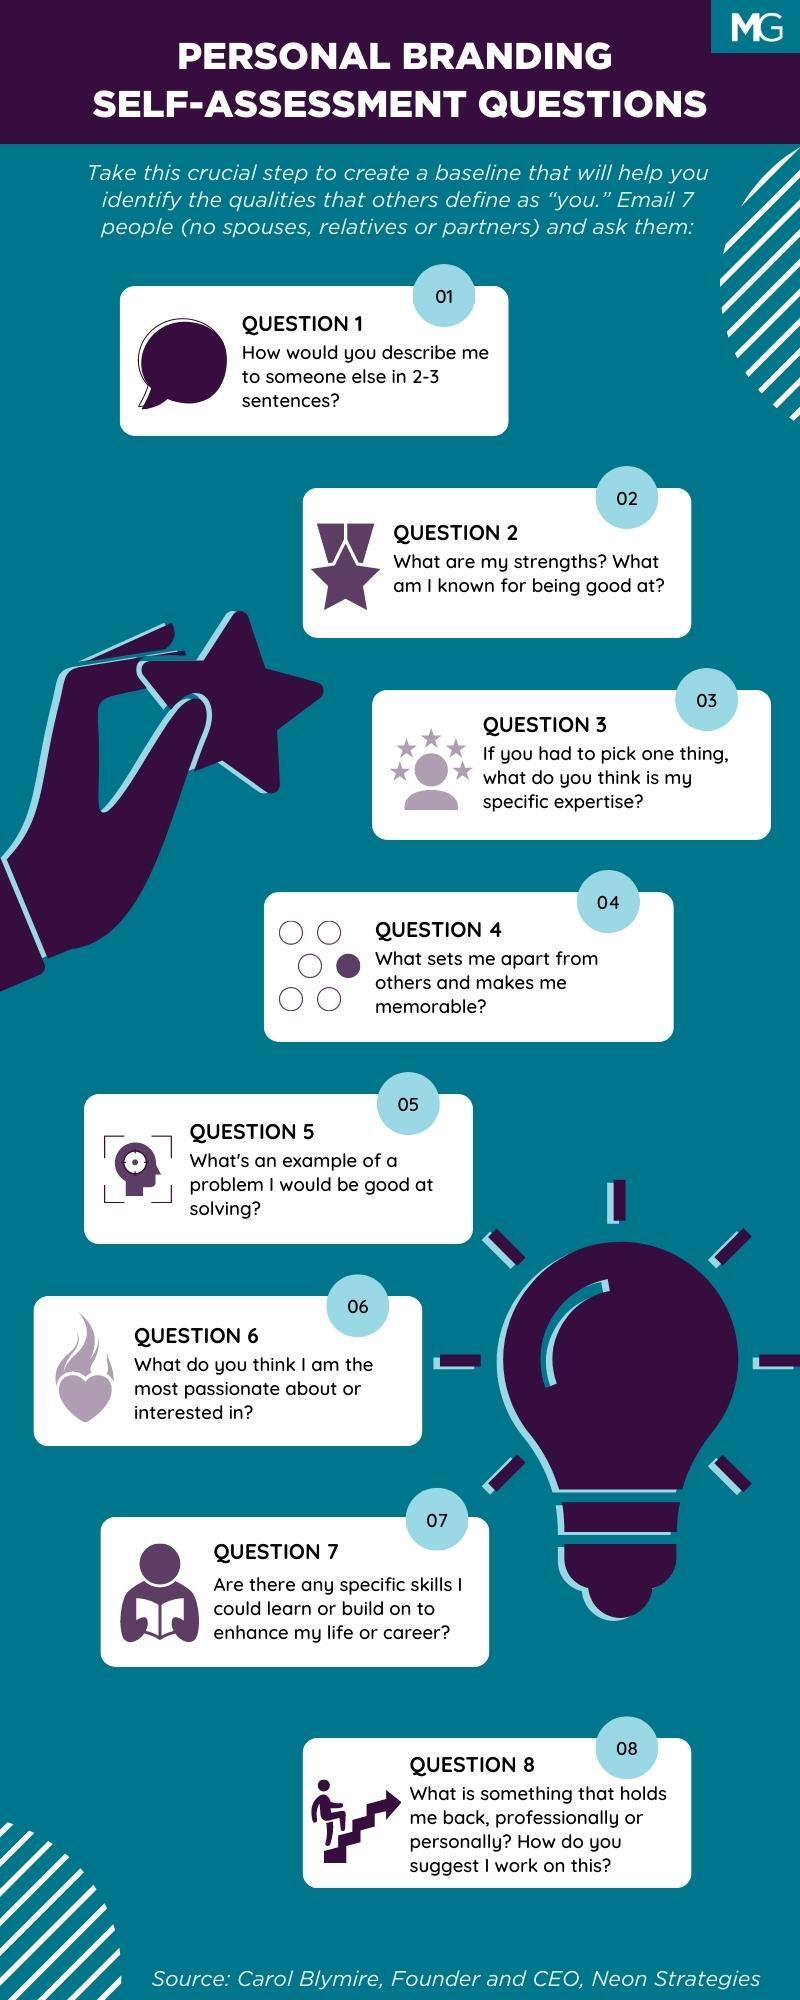 Infographic demonstrating the 8 questions you can ask to conduct a personal branding self assessment. Text reads: "Take this crucial step to create a baseline that will help you identify the qualities that others define as 'you.' Email 7 people (no spouses, relatives, or partners) and ask them: 1) How would you describe me to someone else in two-to-three sentences? 2) What are my strengths? What am I known for being good at? 3) If you had to pick one thing, what do you think is my specific expertise? 4) What sets me apart from others and makes me memorable? 5) What’s an example of a problem I would be good at solving? 6) What do you think I am most passionate about or interested in? 7) Are there any specific skills I could learn or build on to enhance my life or career? 8) What is something that holds me back, professionally or personally? How do you suggest I work on this?"